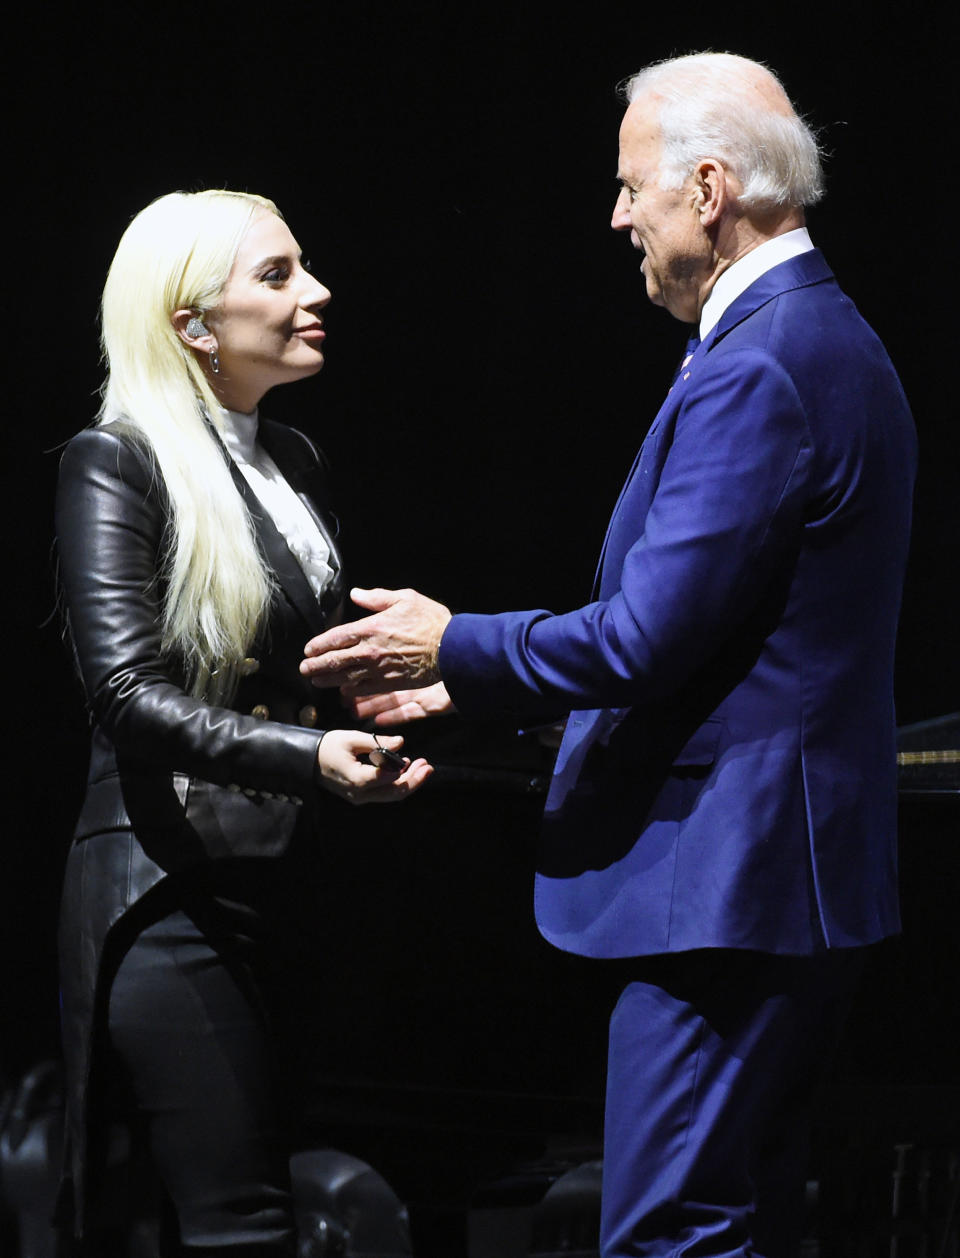 Lady Gaga (L) is greeted by Joe Biden after she performed for students as part of the national It's On Us Week of Action at the Cox Pavilion at UNLV on April 7, 2016 in Las Vegas, Nevada.  (Photo by Ethan Miller/Getty Images)